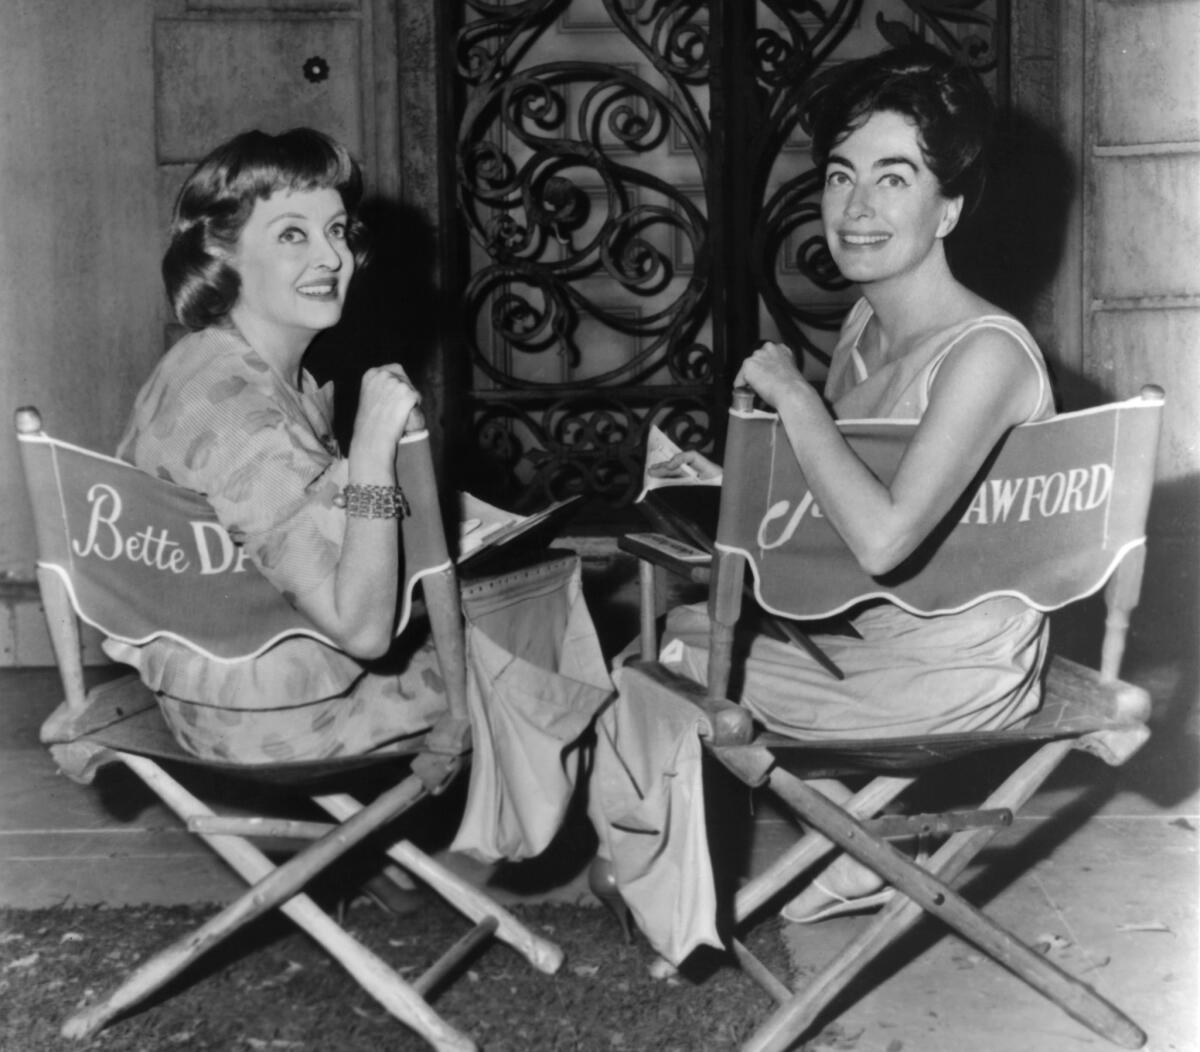 Bette Davis, left, and Joan Crawford in between scenes from the film "What Ever Happened to Baby Jane?" in 1962.